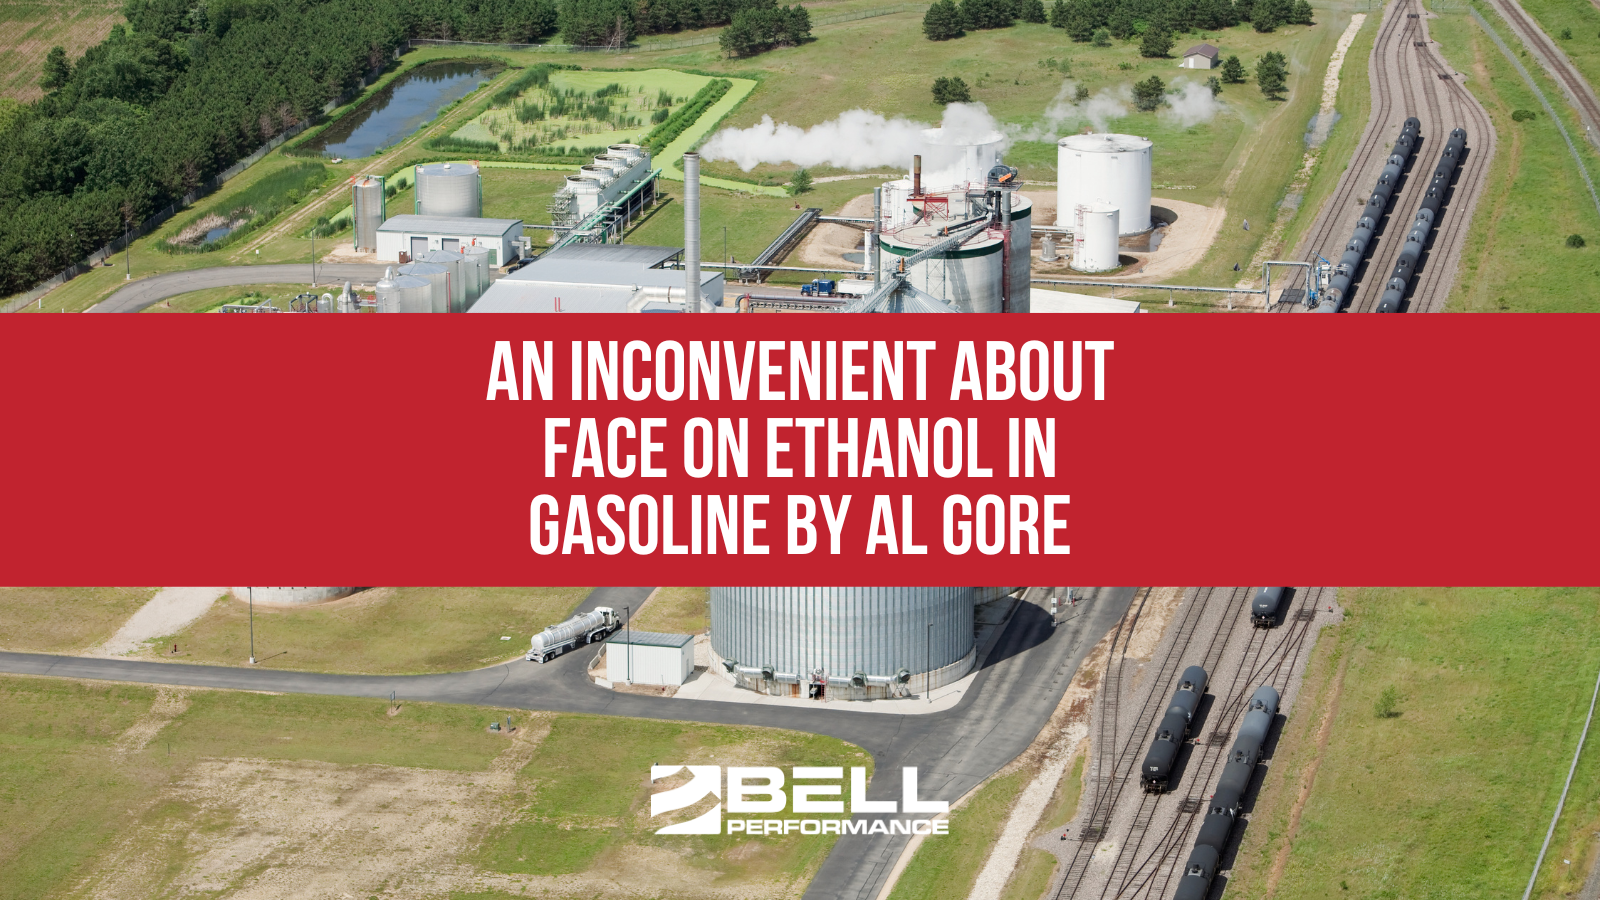 An Inconvenient About Face on Ethanol in Gasoline by Al Gore